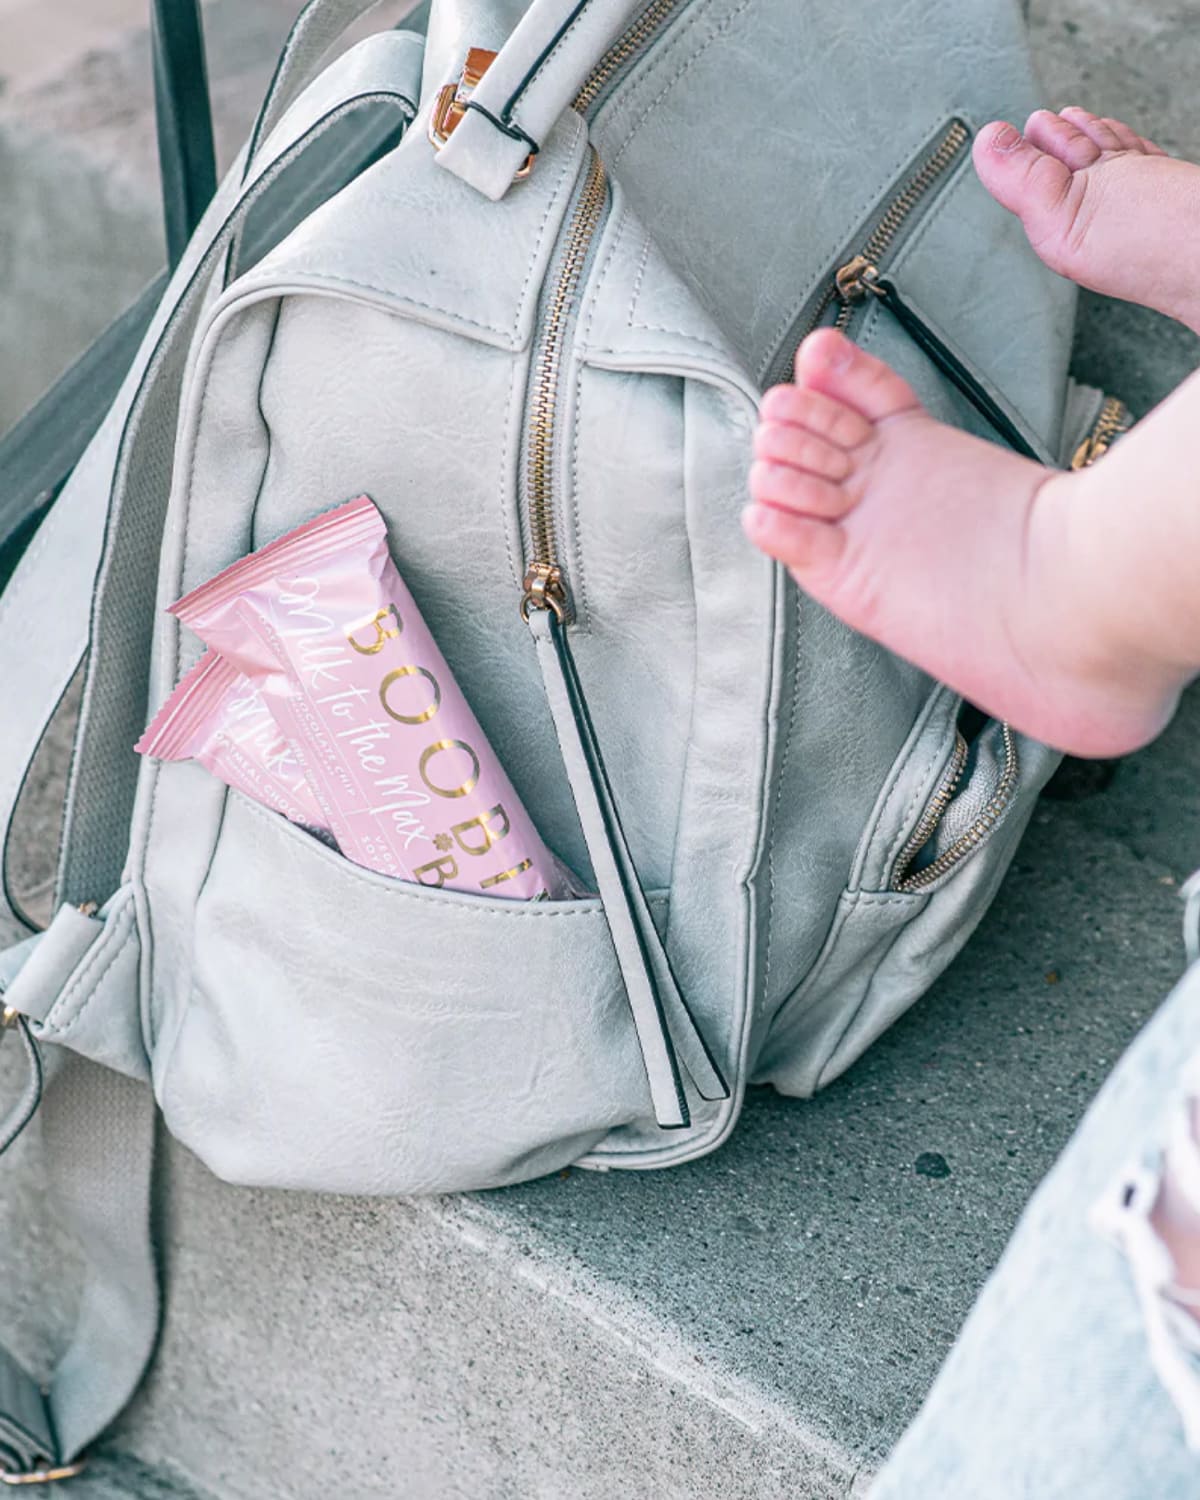 Boobie lactation bars in a gray diaper bag with toddler toes in the frame.